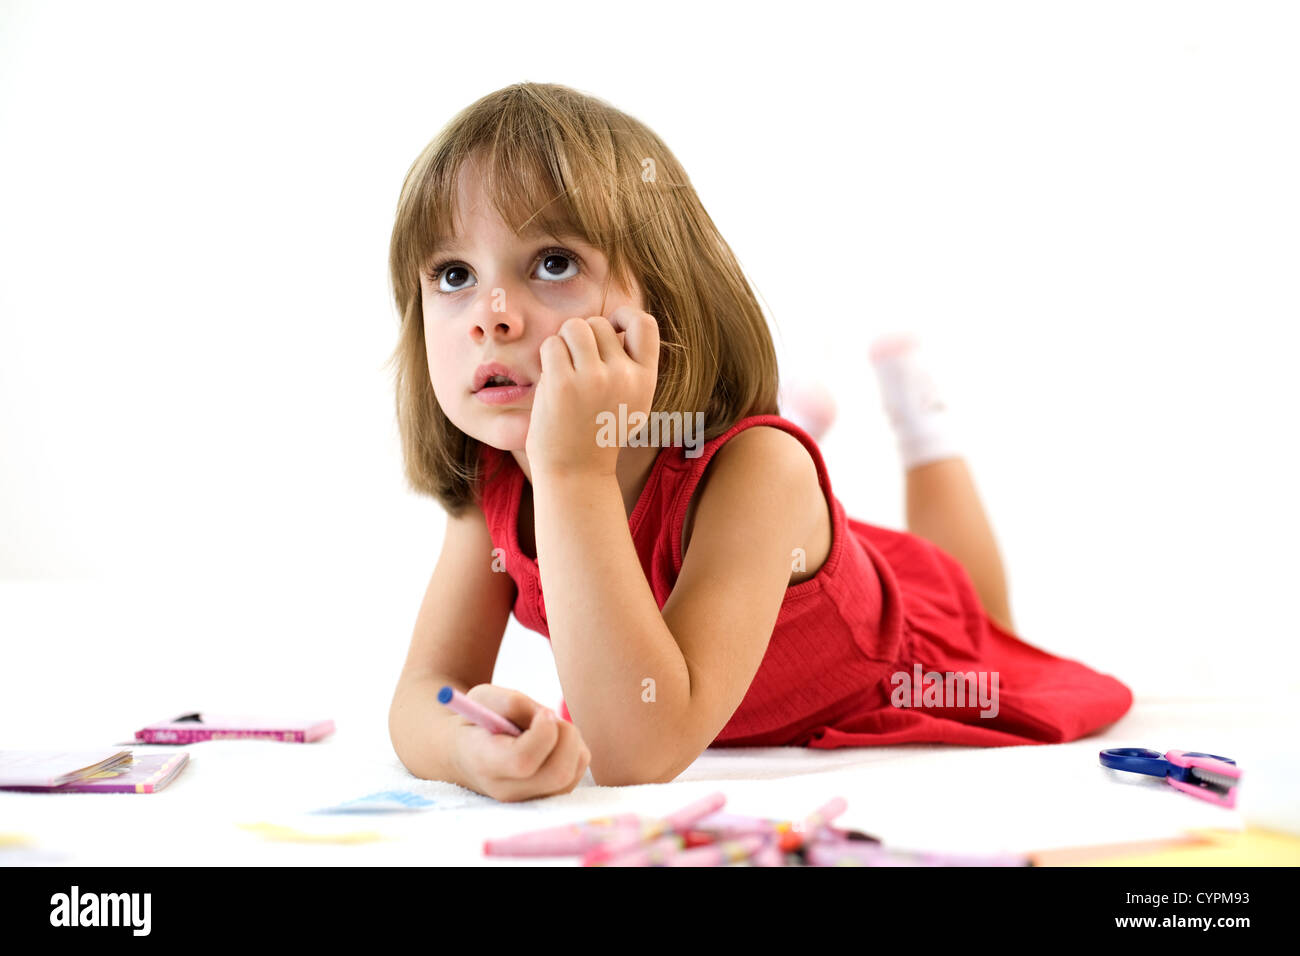 Focused little girl is lying and holding a crayon Stock Photo